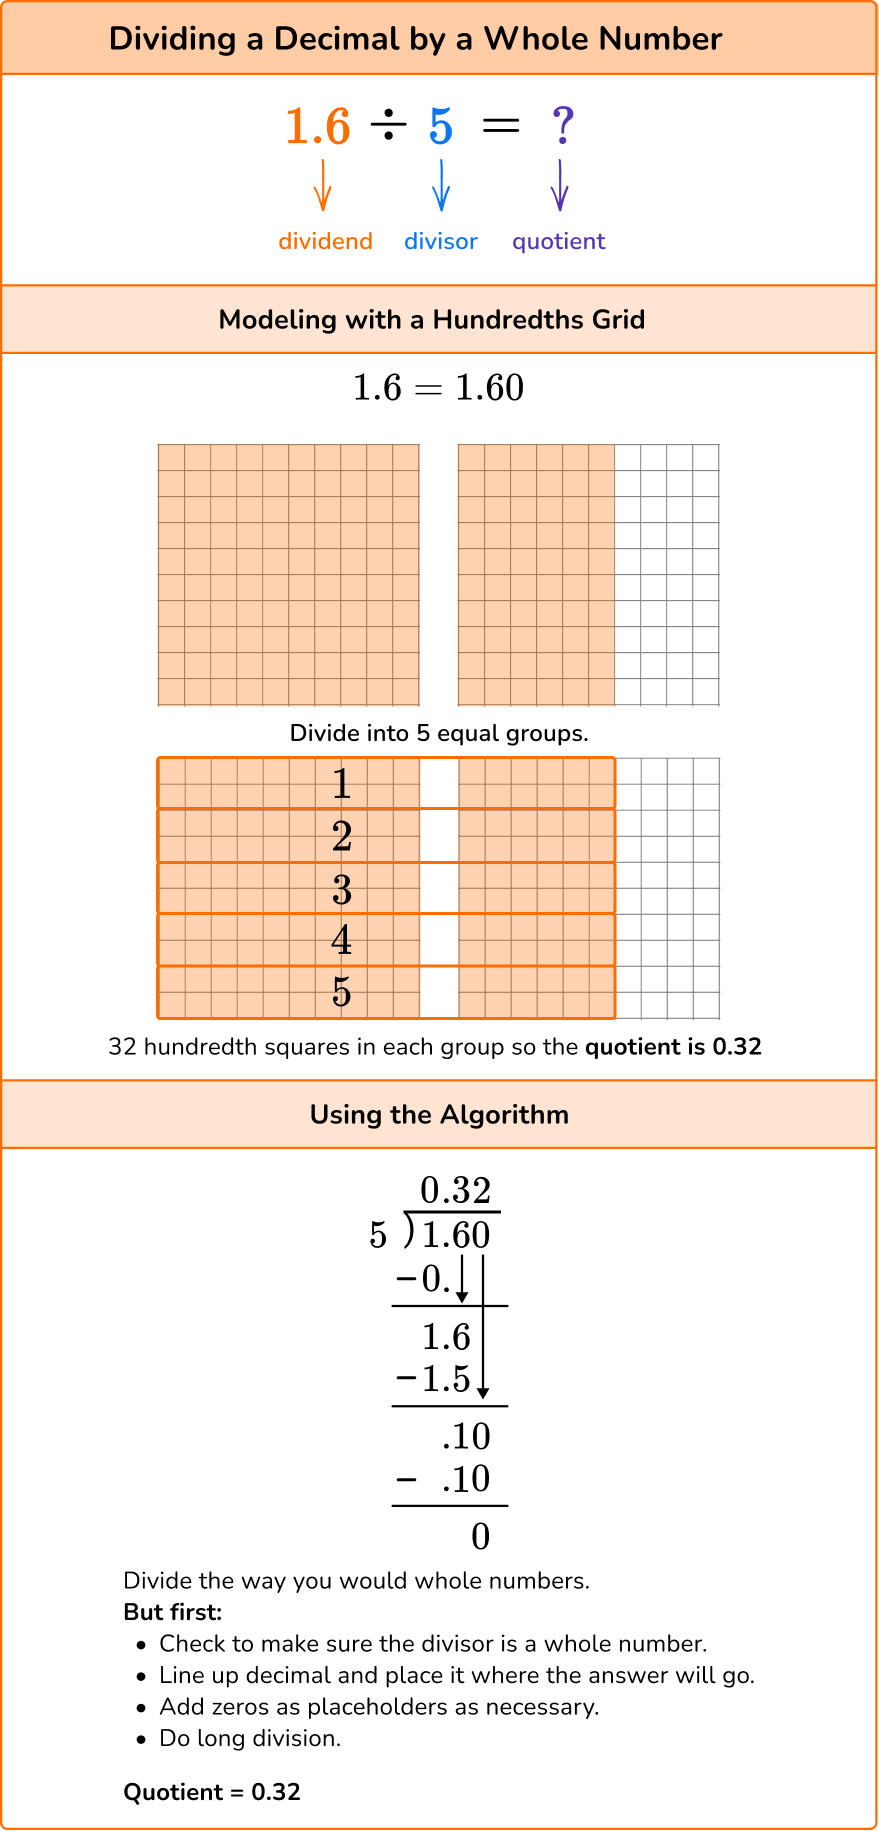 Multiplying and Dividing Decimals Image 2.1